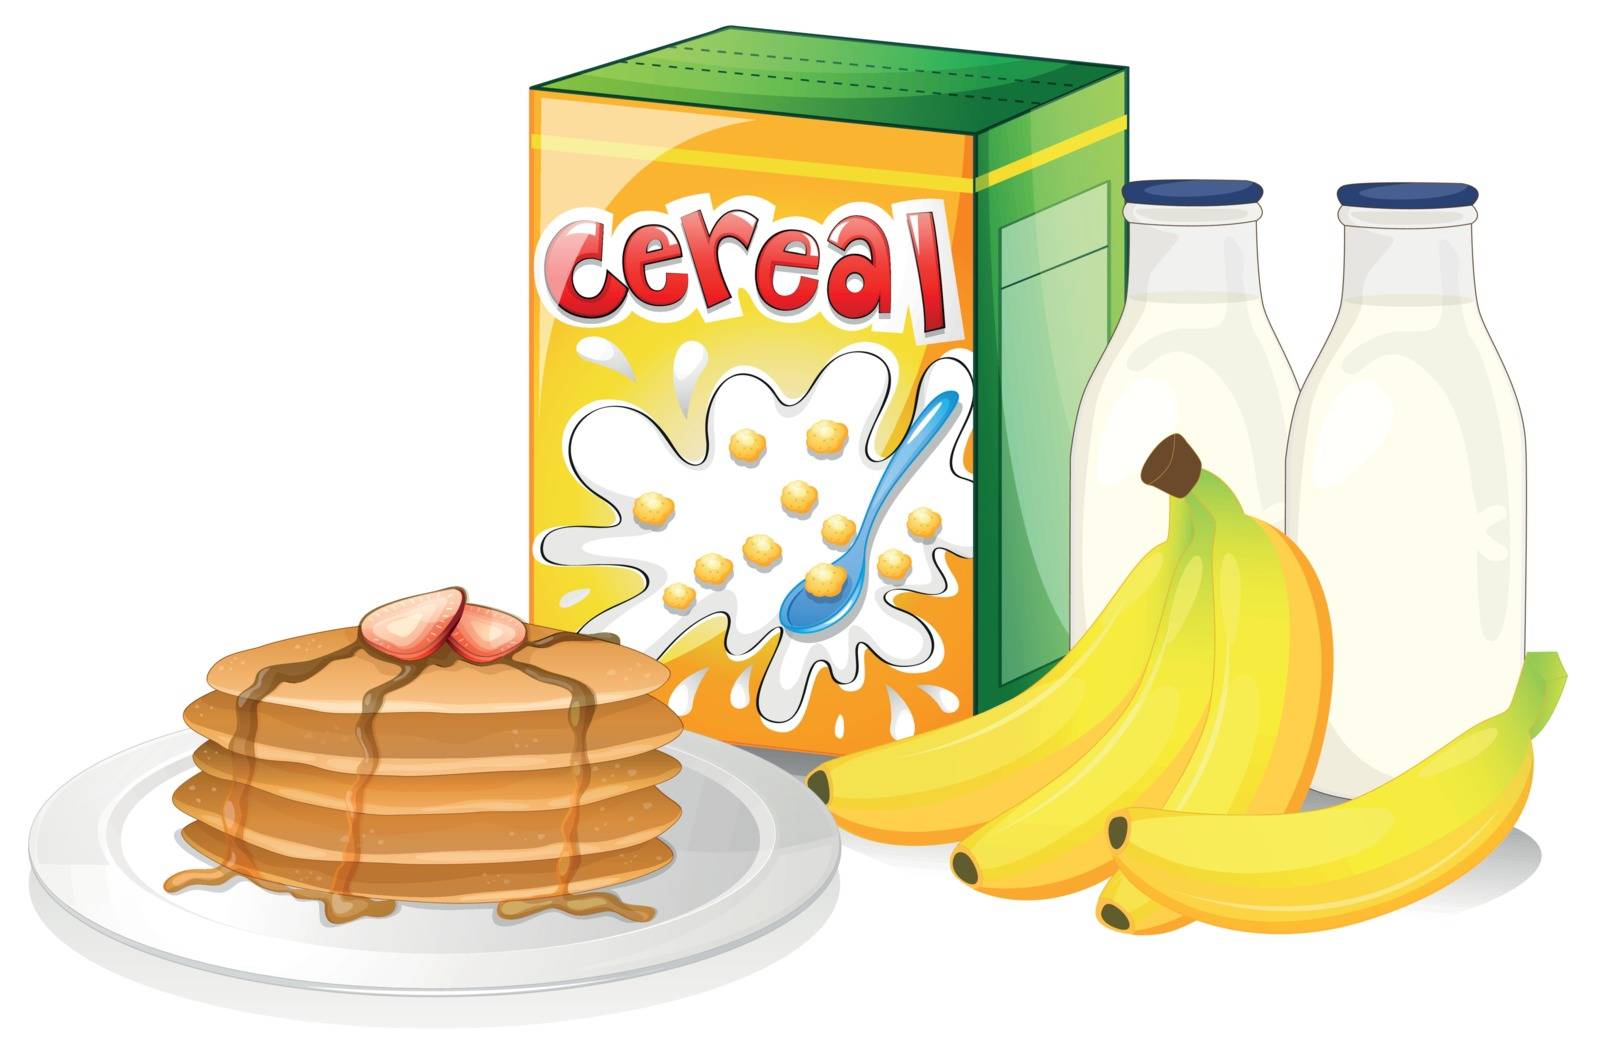 Illustration of a full breakfast meal on a white background